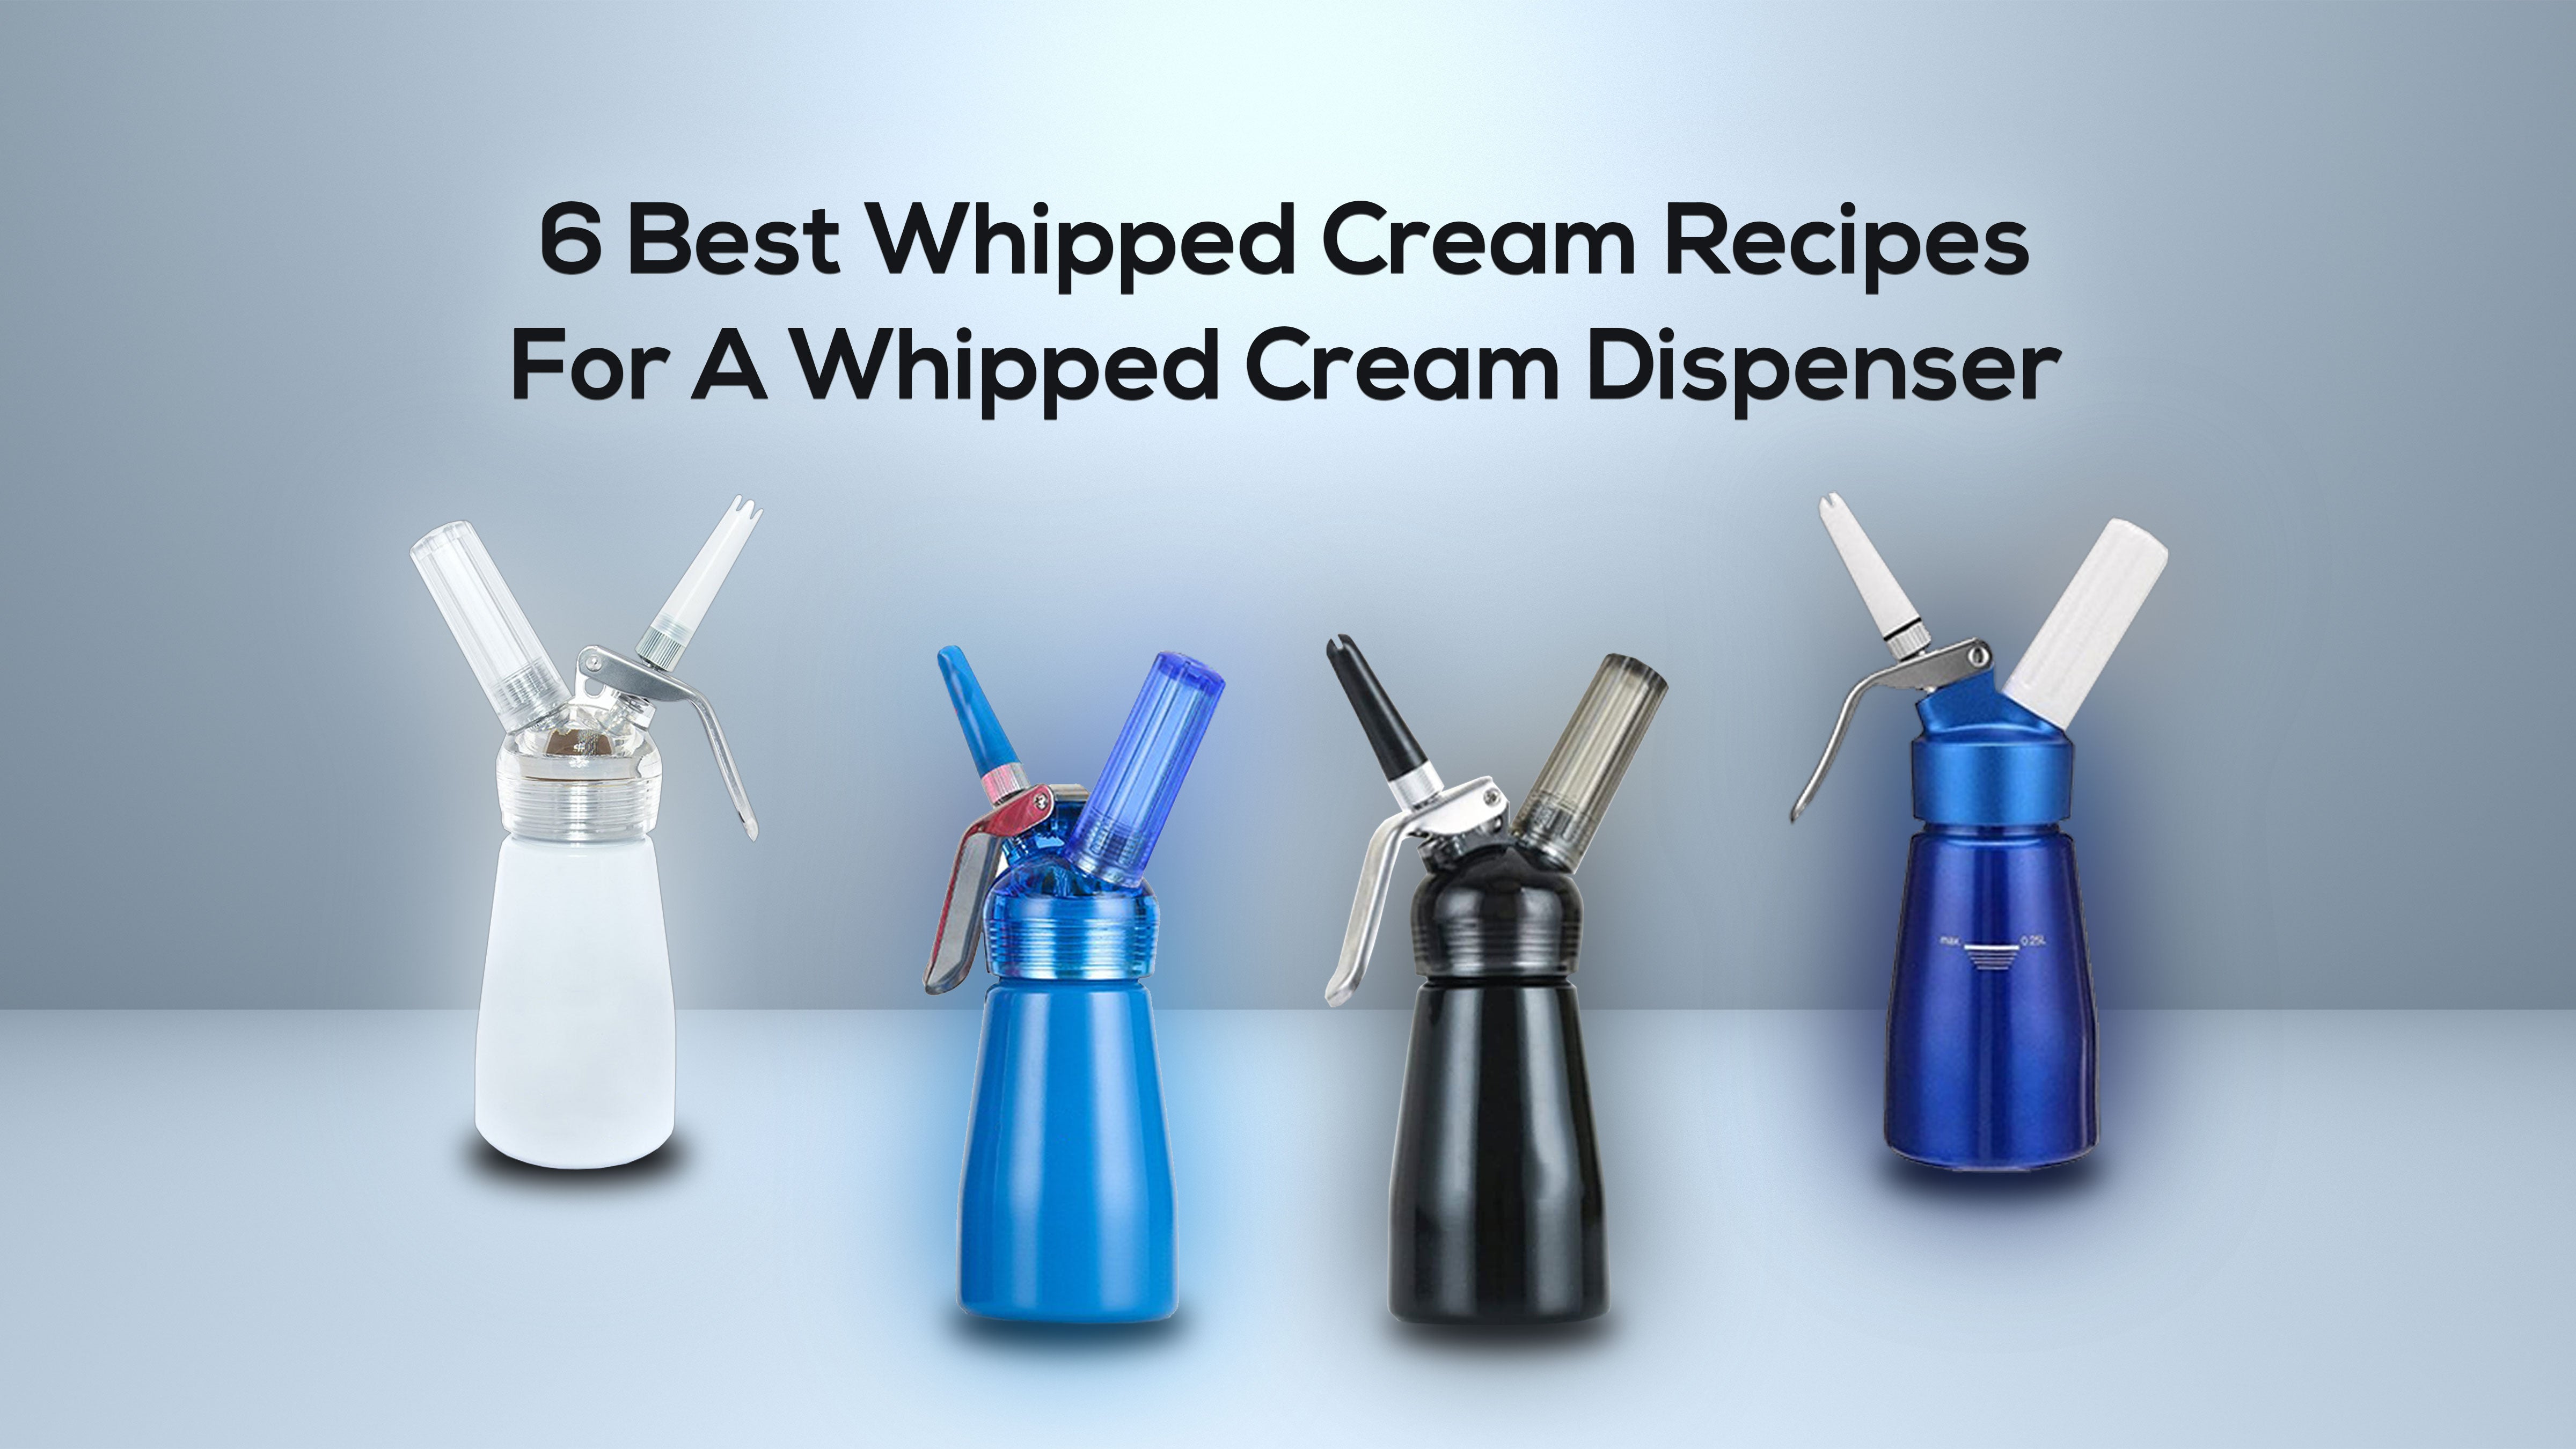 6 Best Whipped Cream Recipes For A Whipped Cream Dispenser